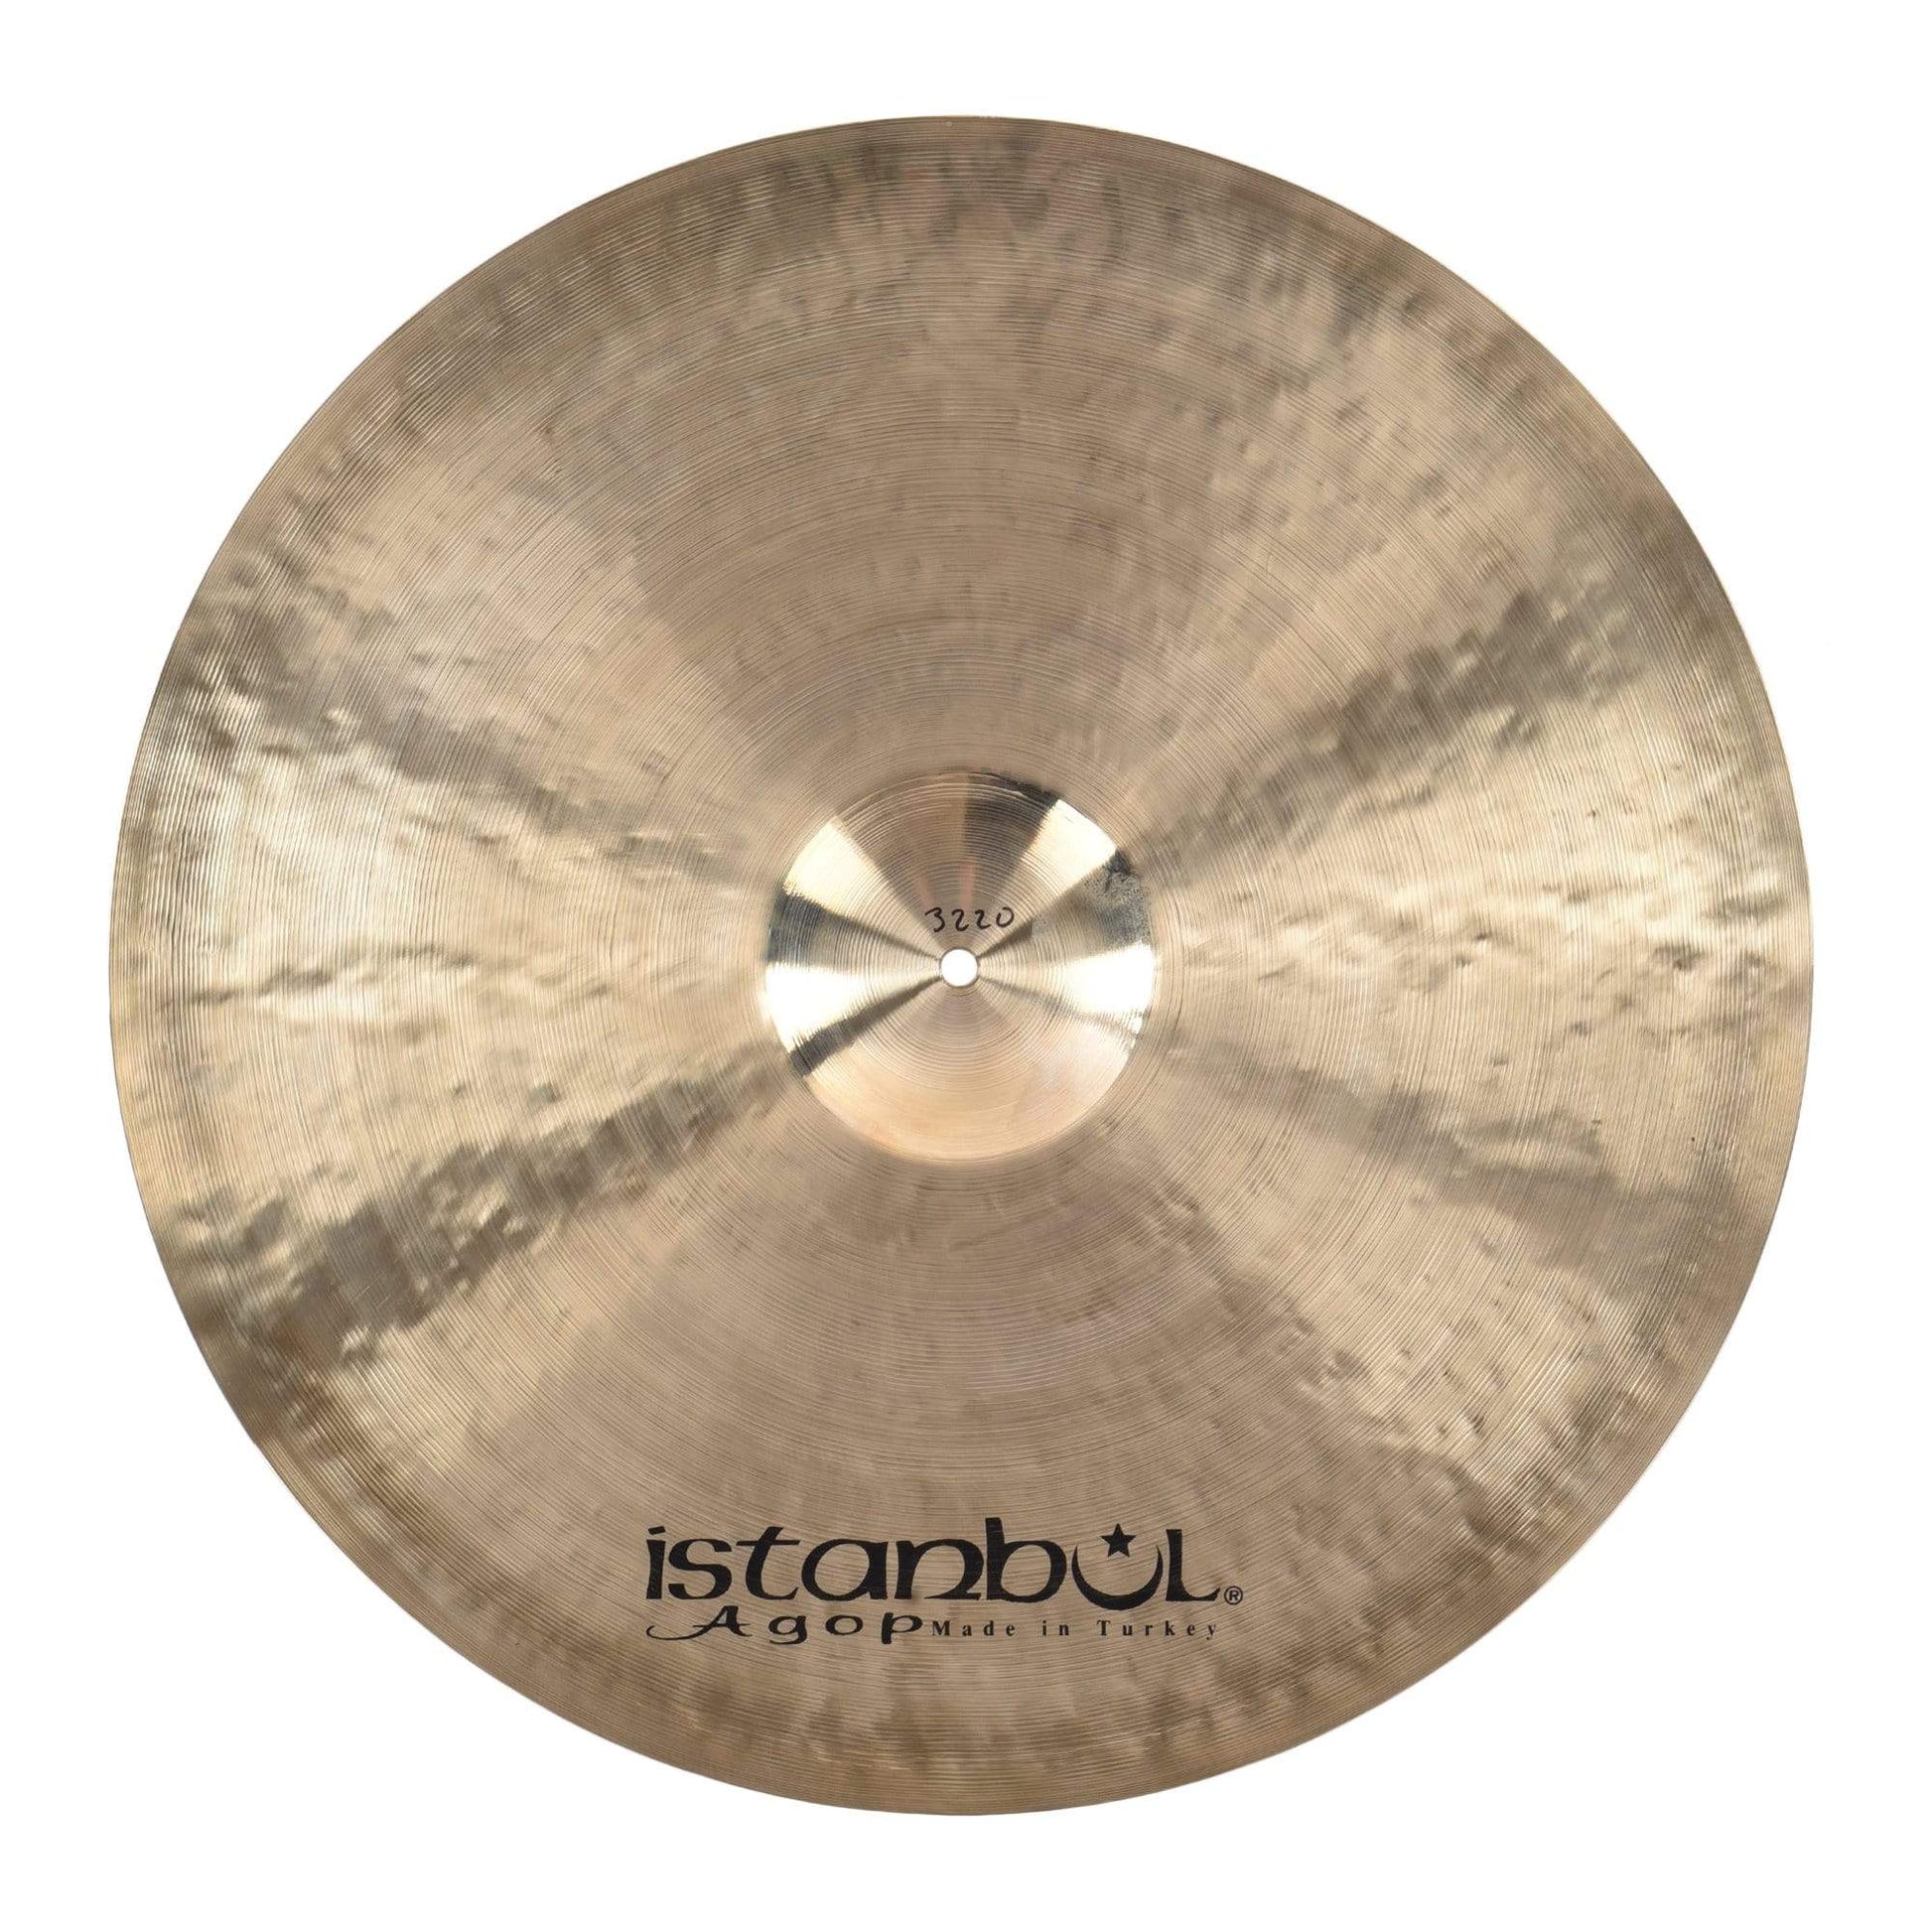 Istanbul Agop 24" Xist Ride Cymbal Brilliant Drums and Percussion / Cymbals / Ride